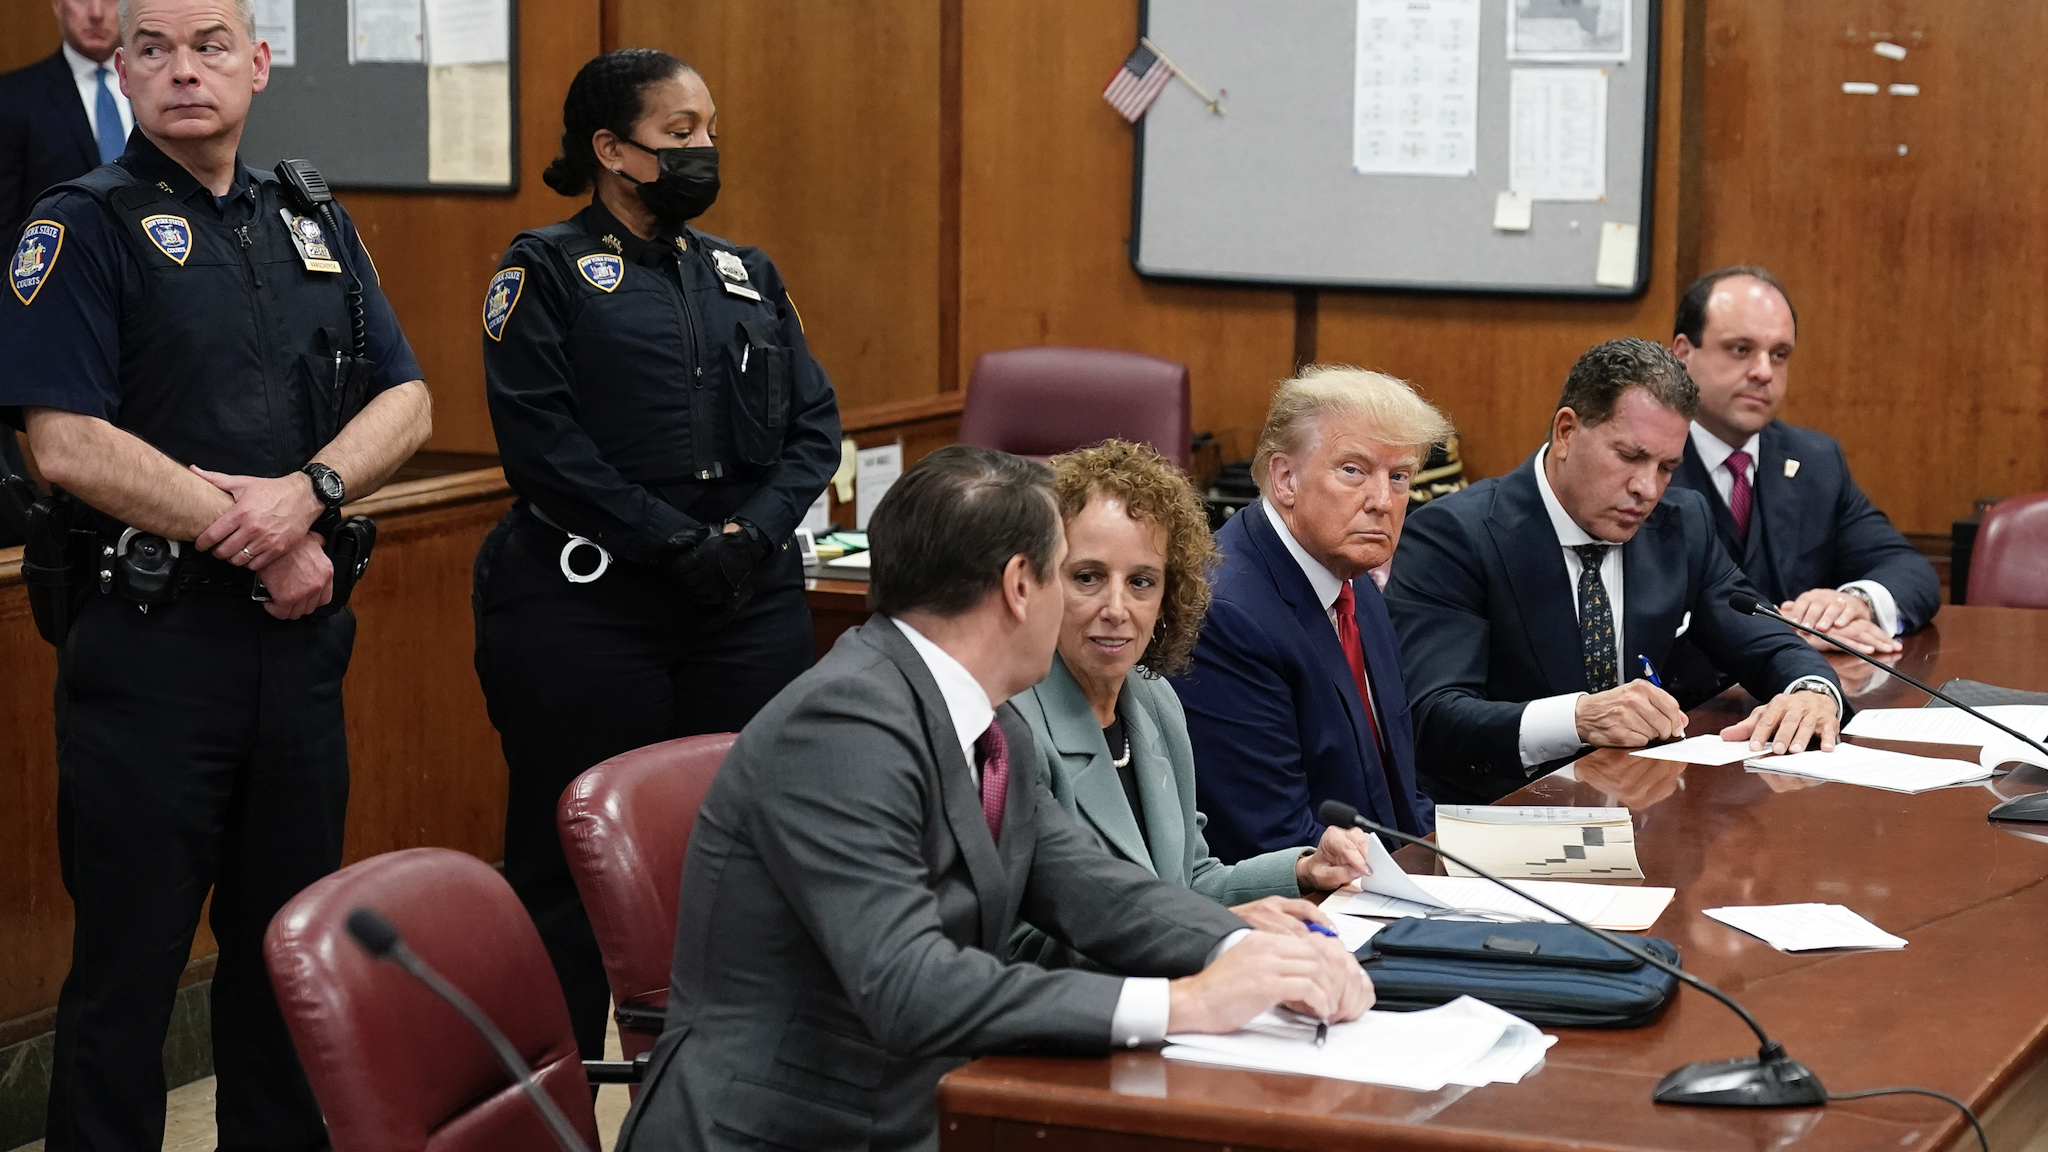 NEW YORK, NEW YORK - APRIL 04: Former U.S. President Donald Trump sits at the defense table with his defense team in a Manhattan court during his arraignment on April 4, 2023, in New York City. Trump was arraigned during his first court appearance today following an indictment by a grand jury that heard evidence about money paid to adult film star Stormy Daniels before the 16 presidential election. With the indictment, Trump becomes the first former U.S. president in history to be charged with a criminal offense.